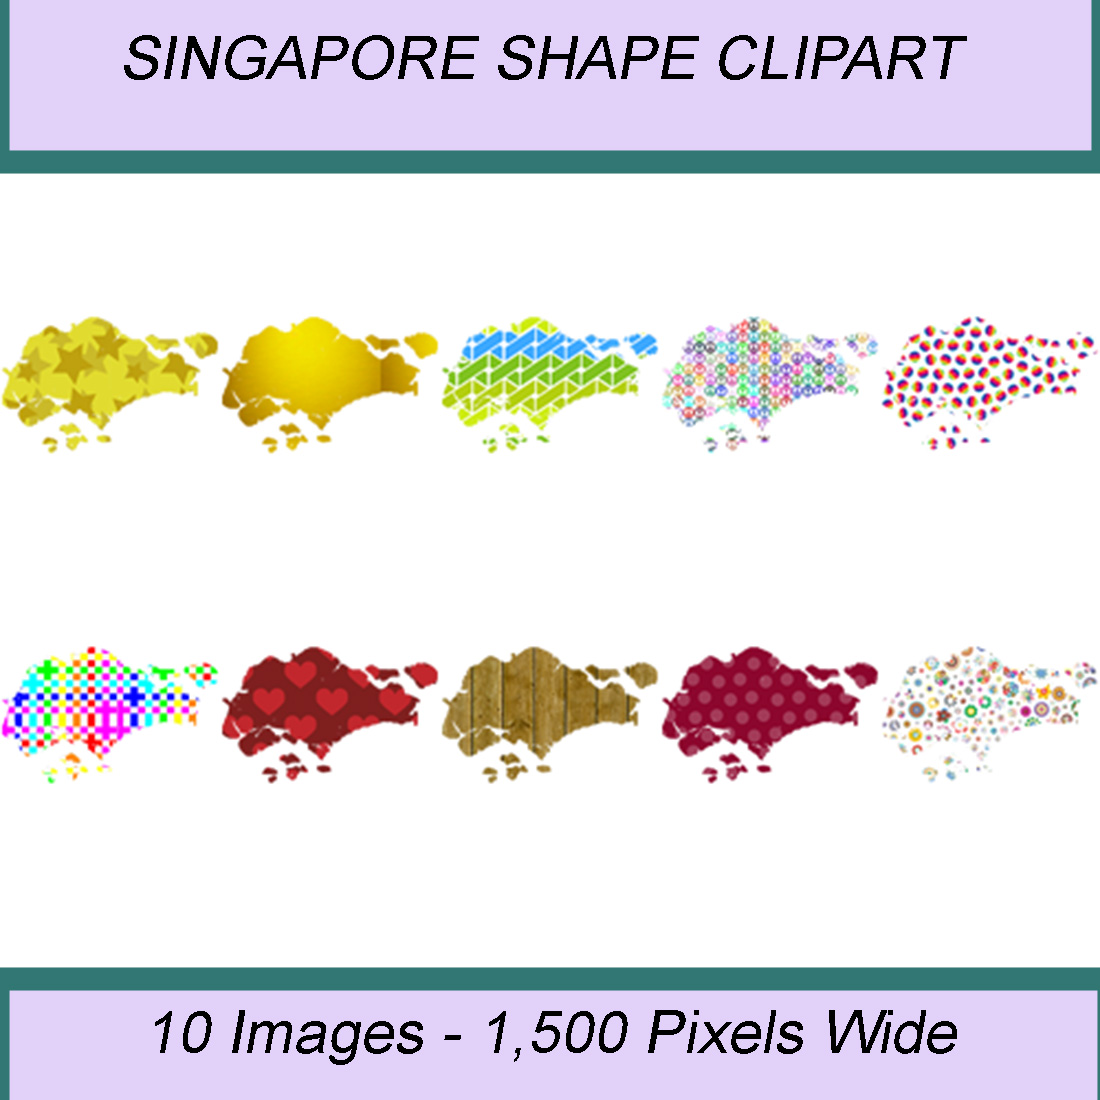 SINGAPORE SHAPE CLIPART ICONS cover image.